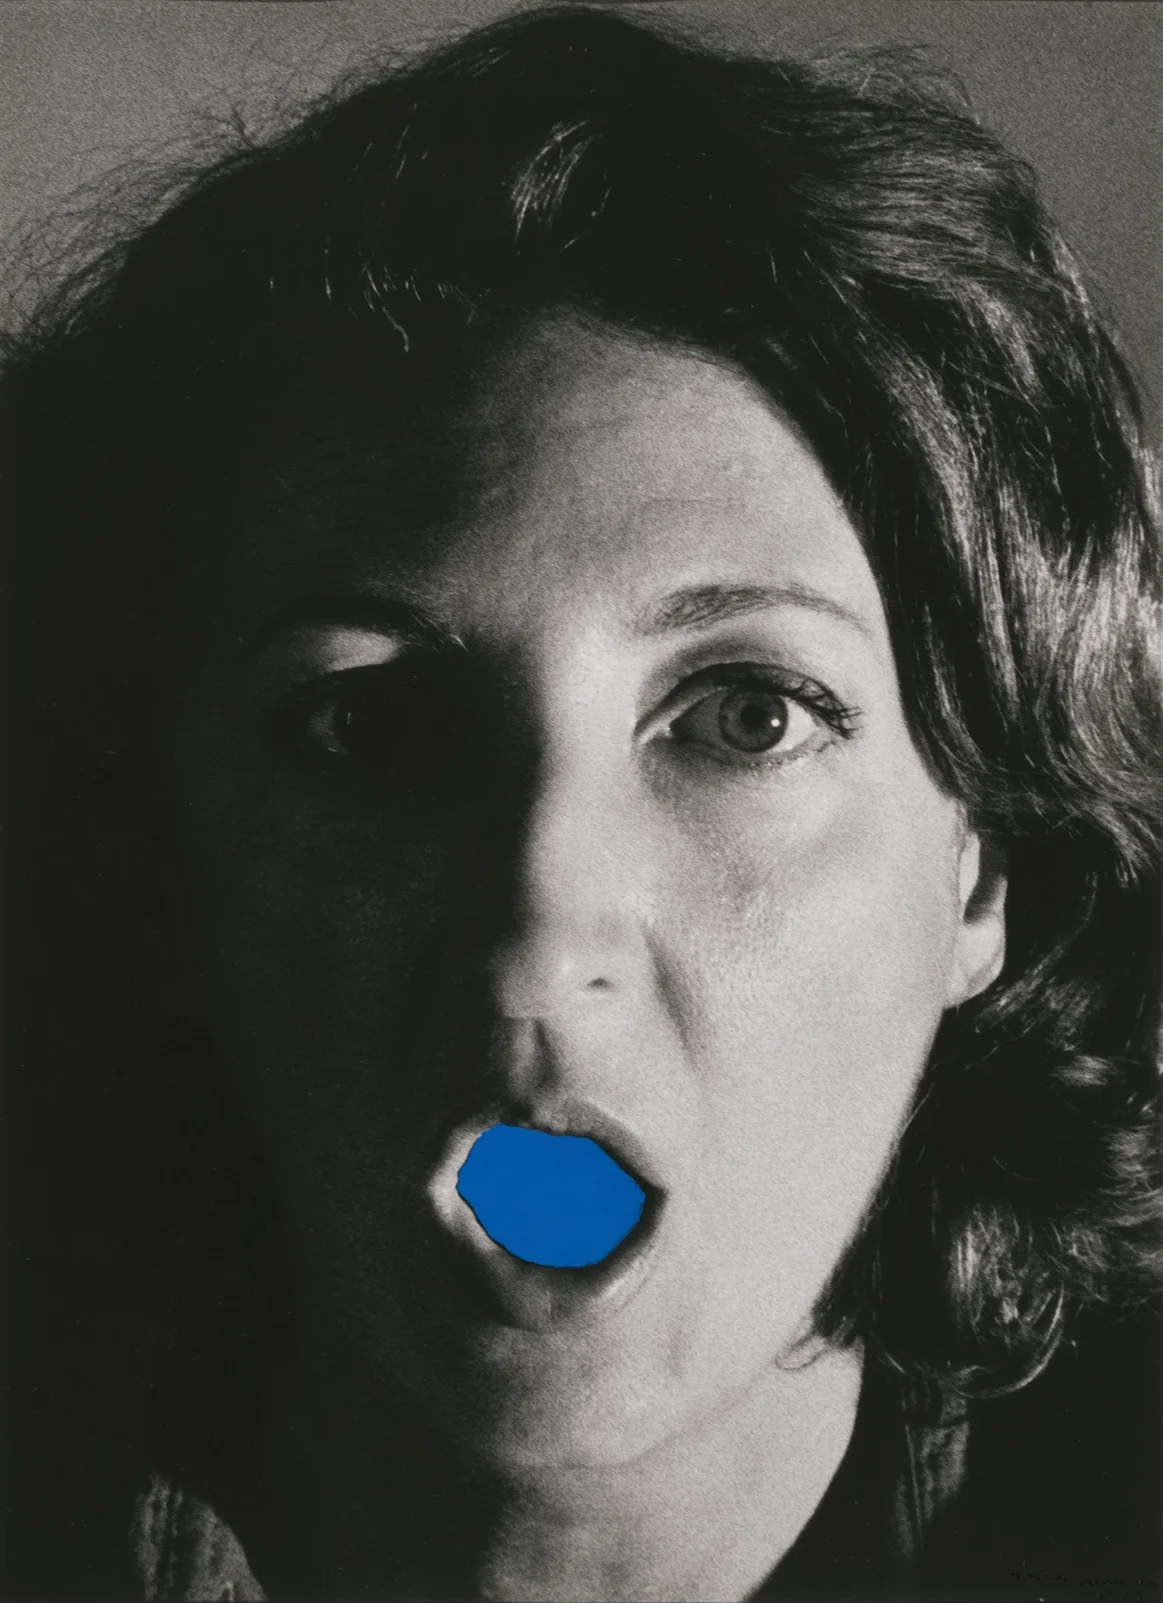 A work of art by Helena Almeida, featuring a black-and-white portrait of a woman with her mouth open. The inside of the mouth is painted blue.